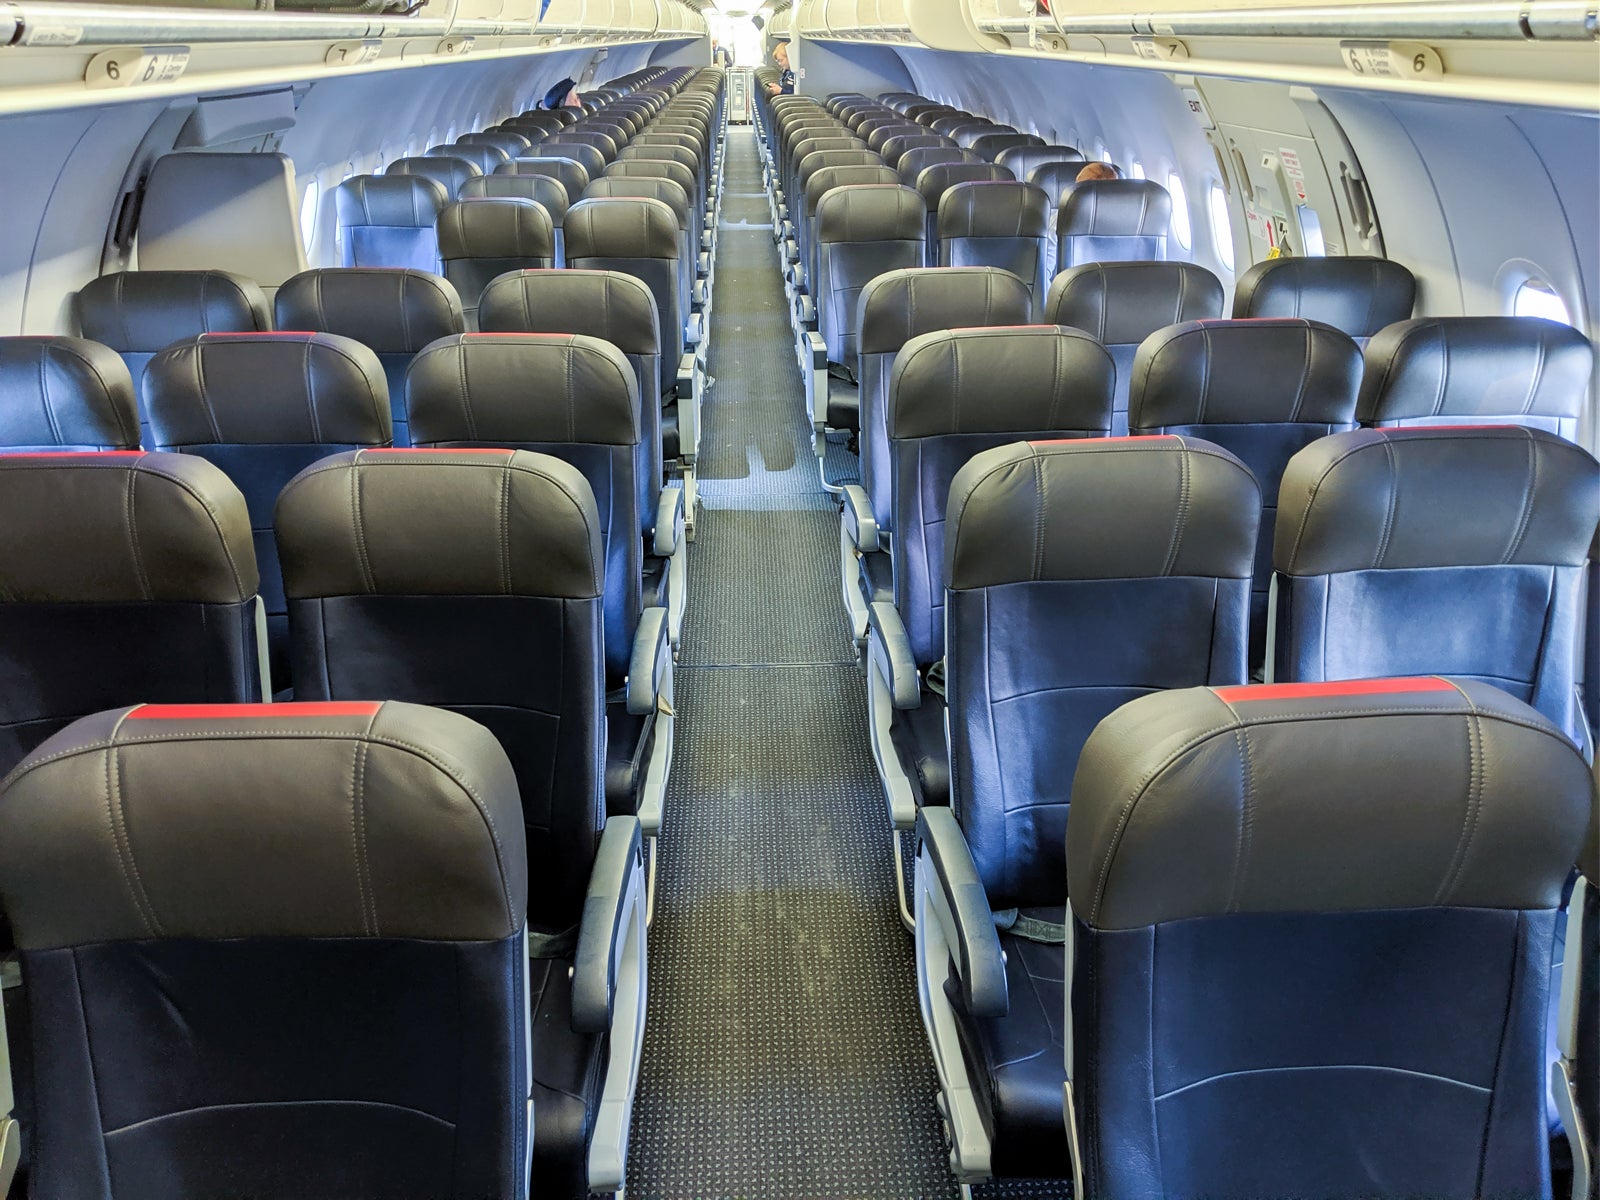 Review: American Airlines A321 (LUS) Economy - PHL to LAX